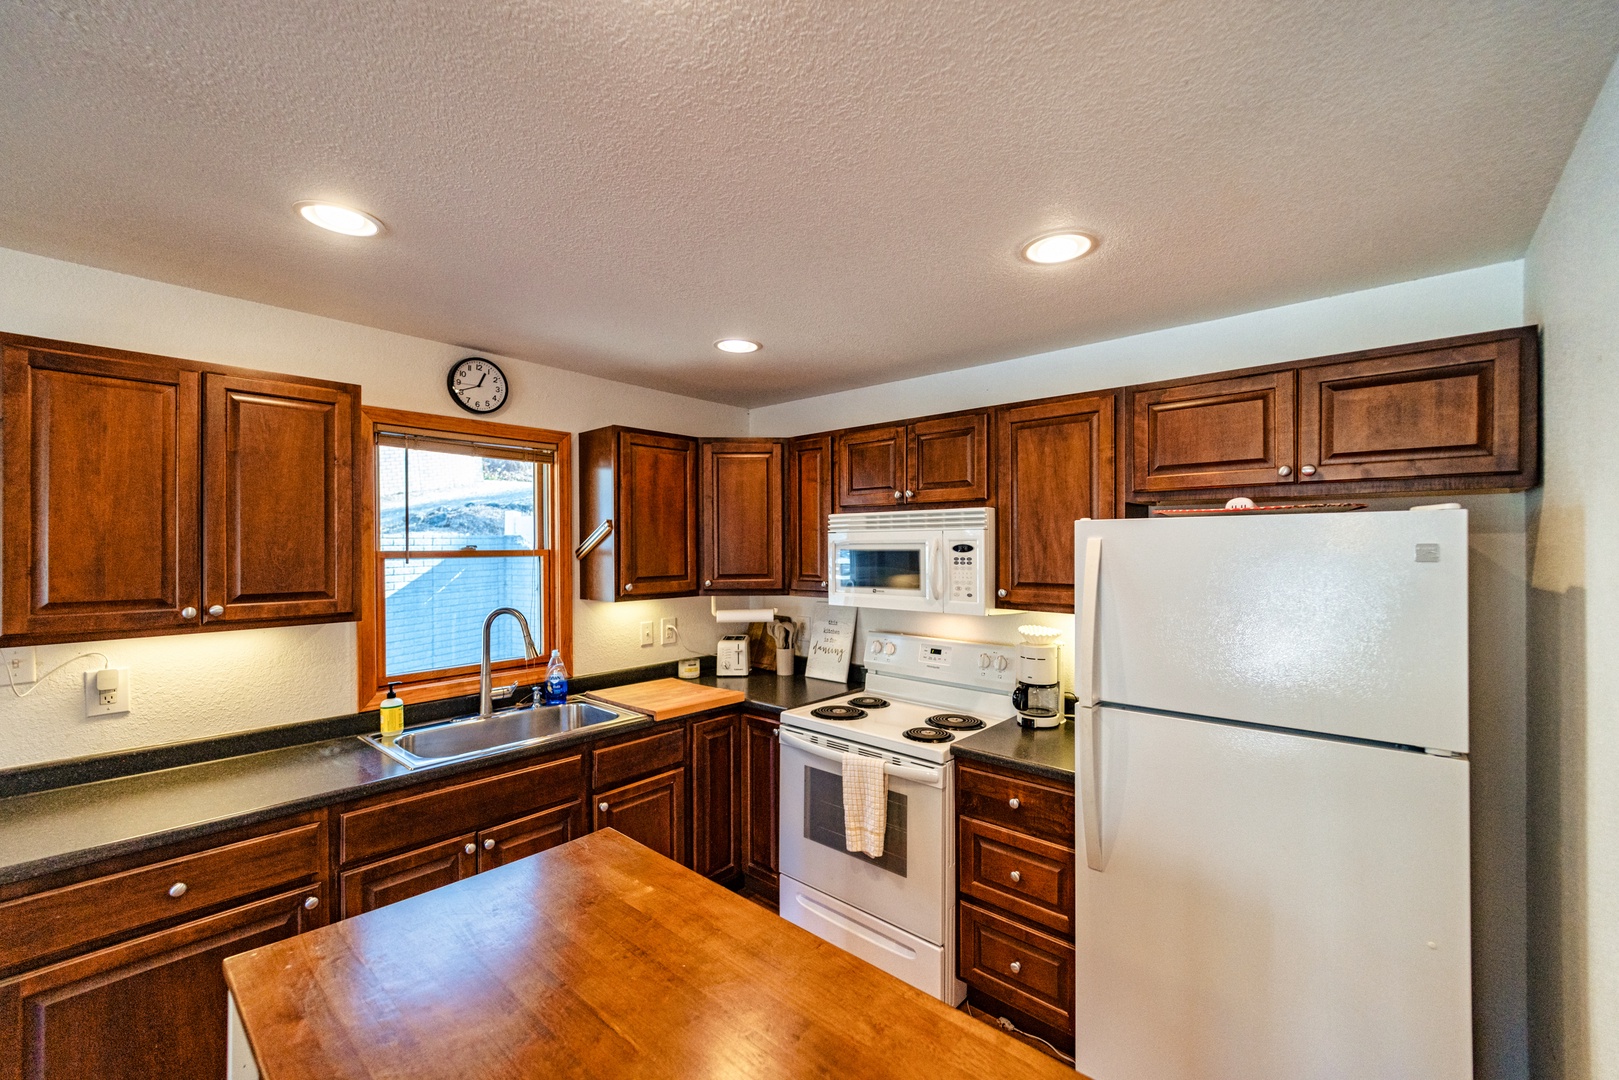 The cozy, open kitchen offers ample space & all the comforts of home